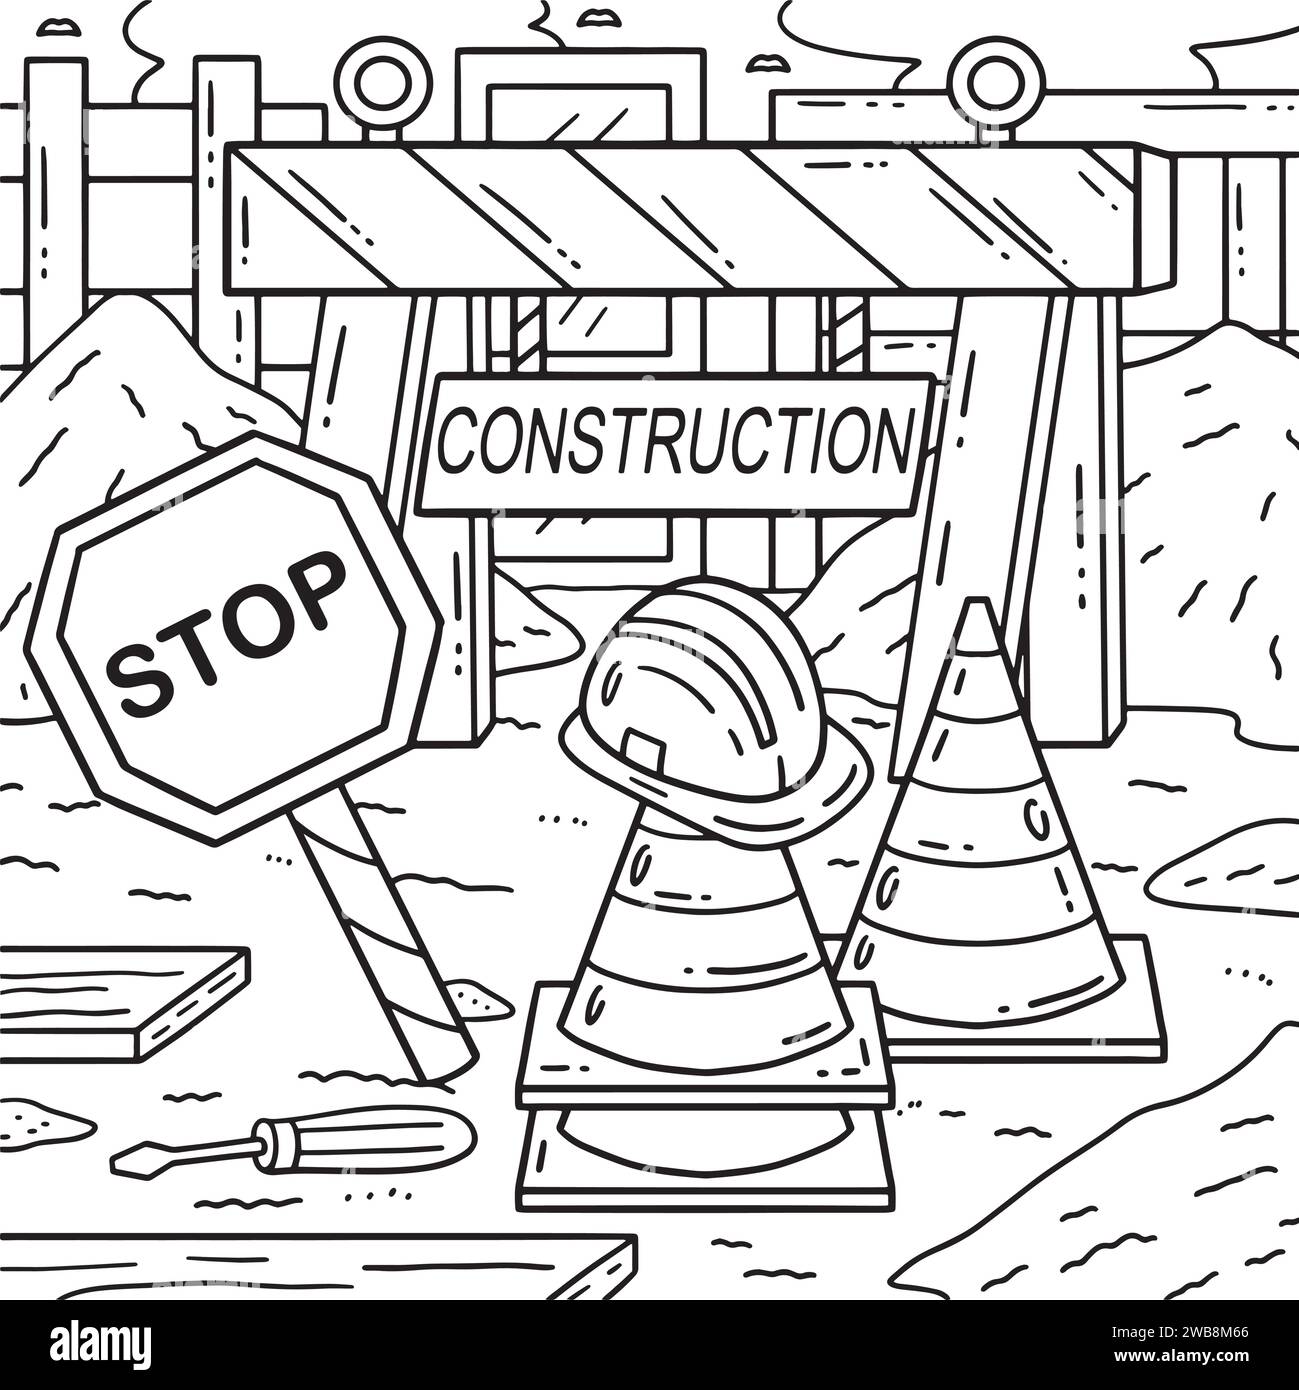 Construction Safety Signage Coloring Page for Kids Stock Vector